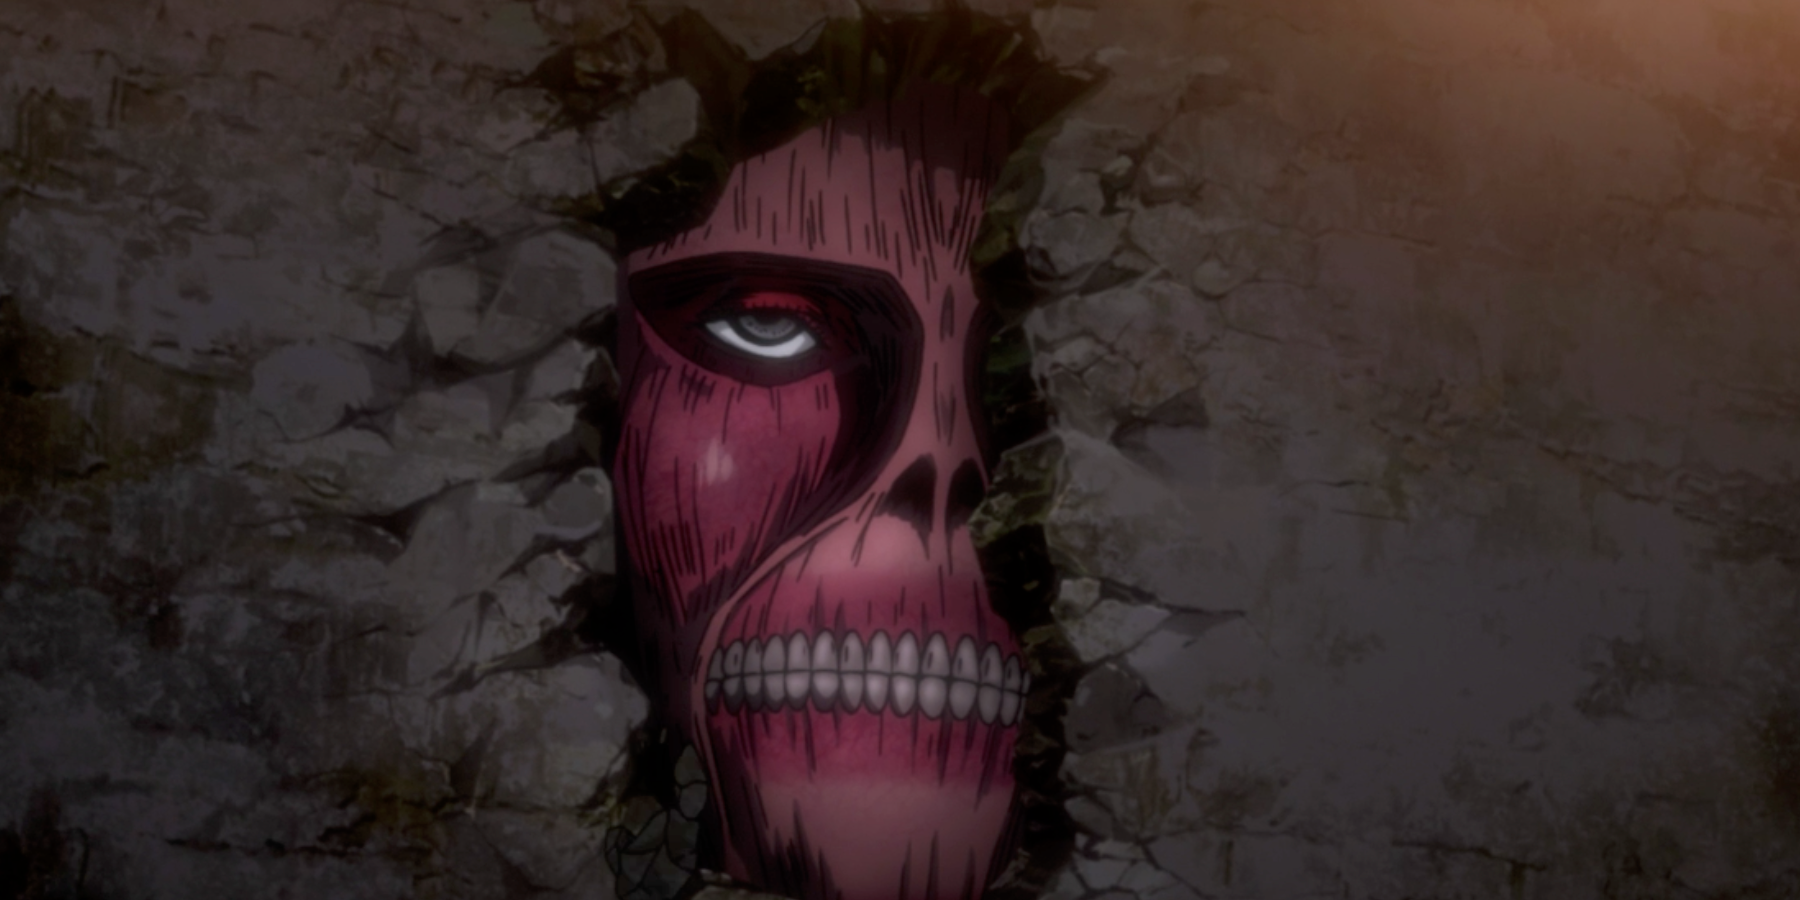 Attack on Titan: The Mystery of the Wall Titans, uitgelegd